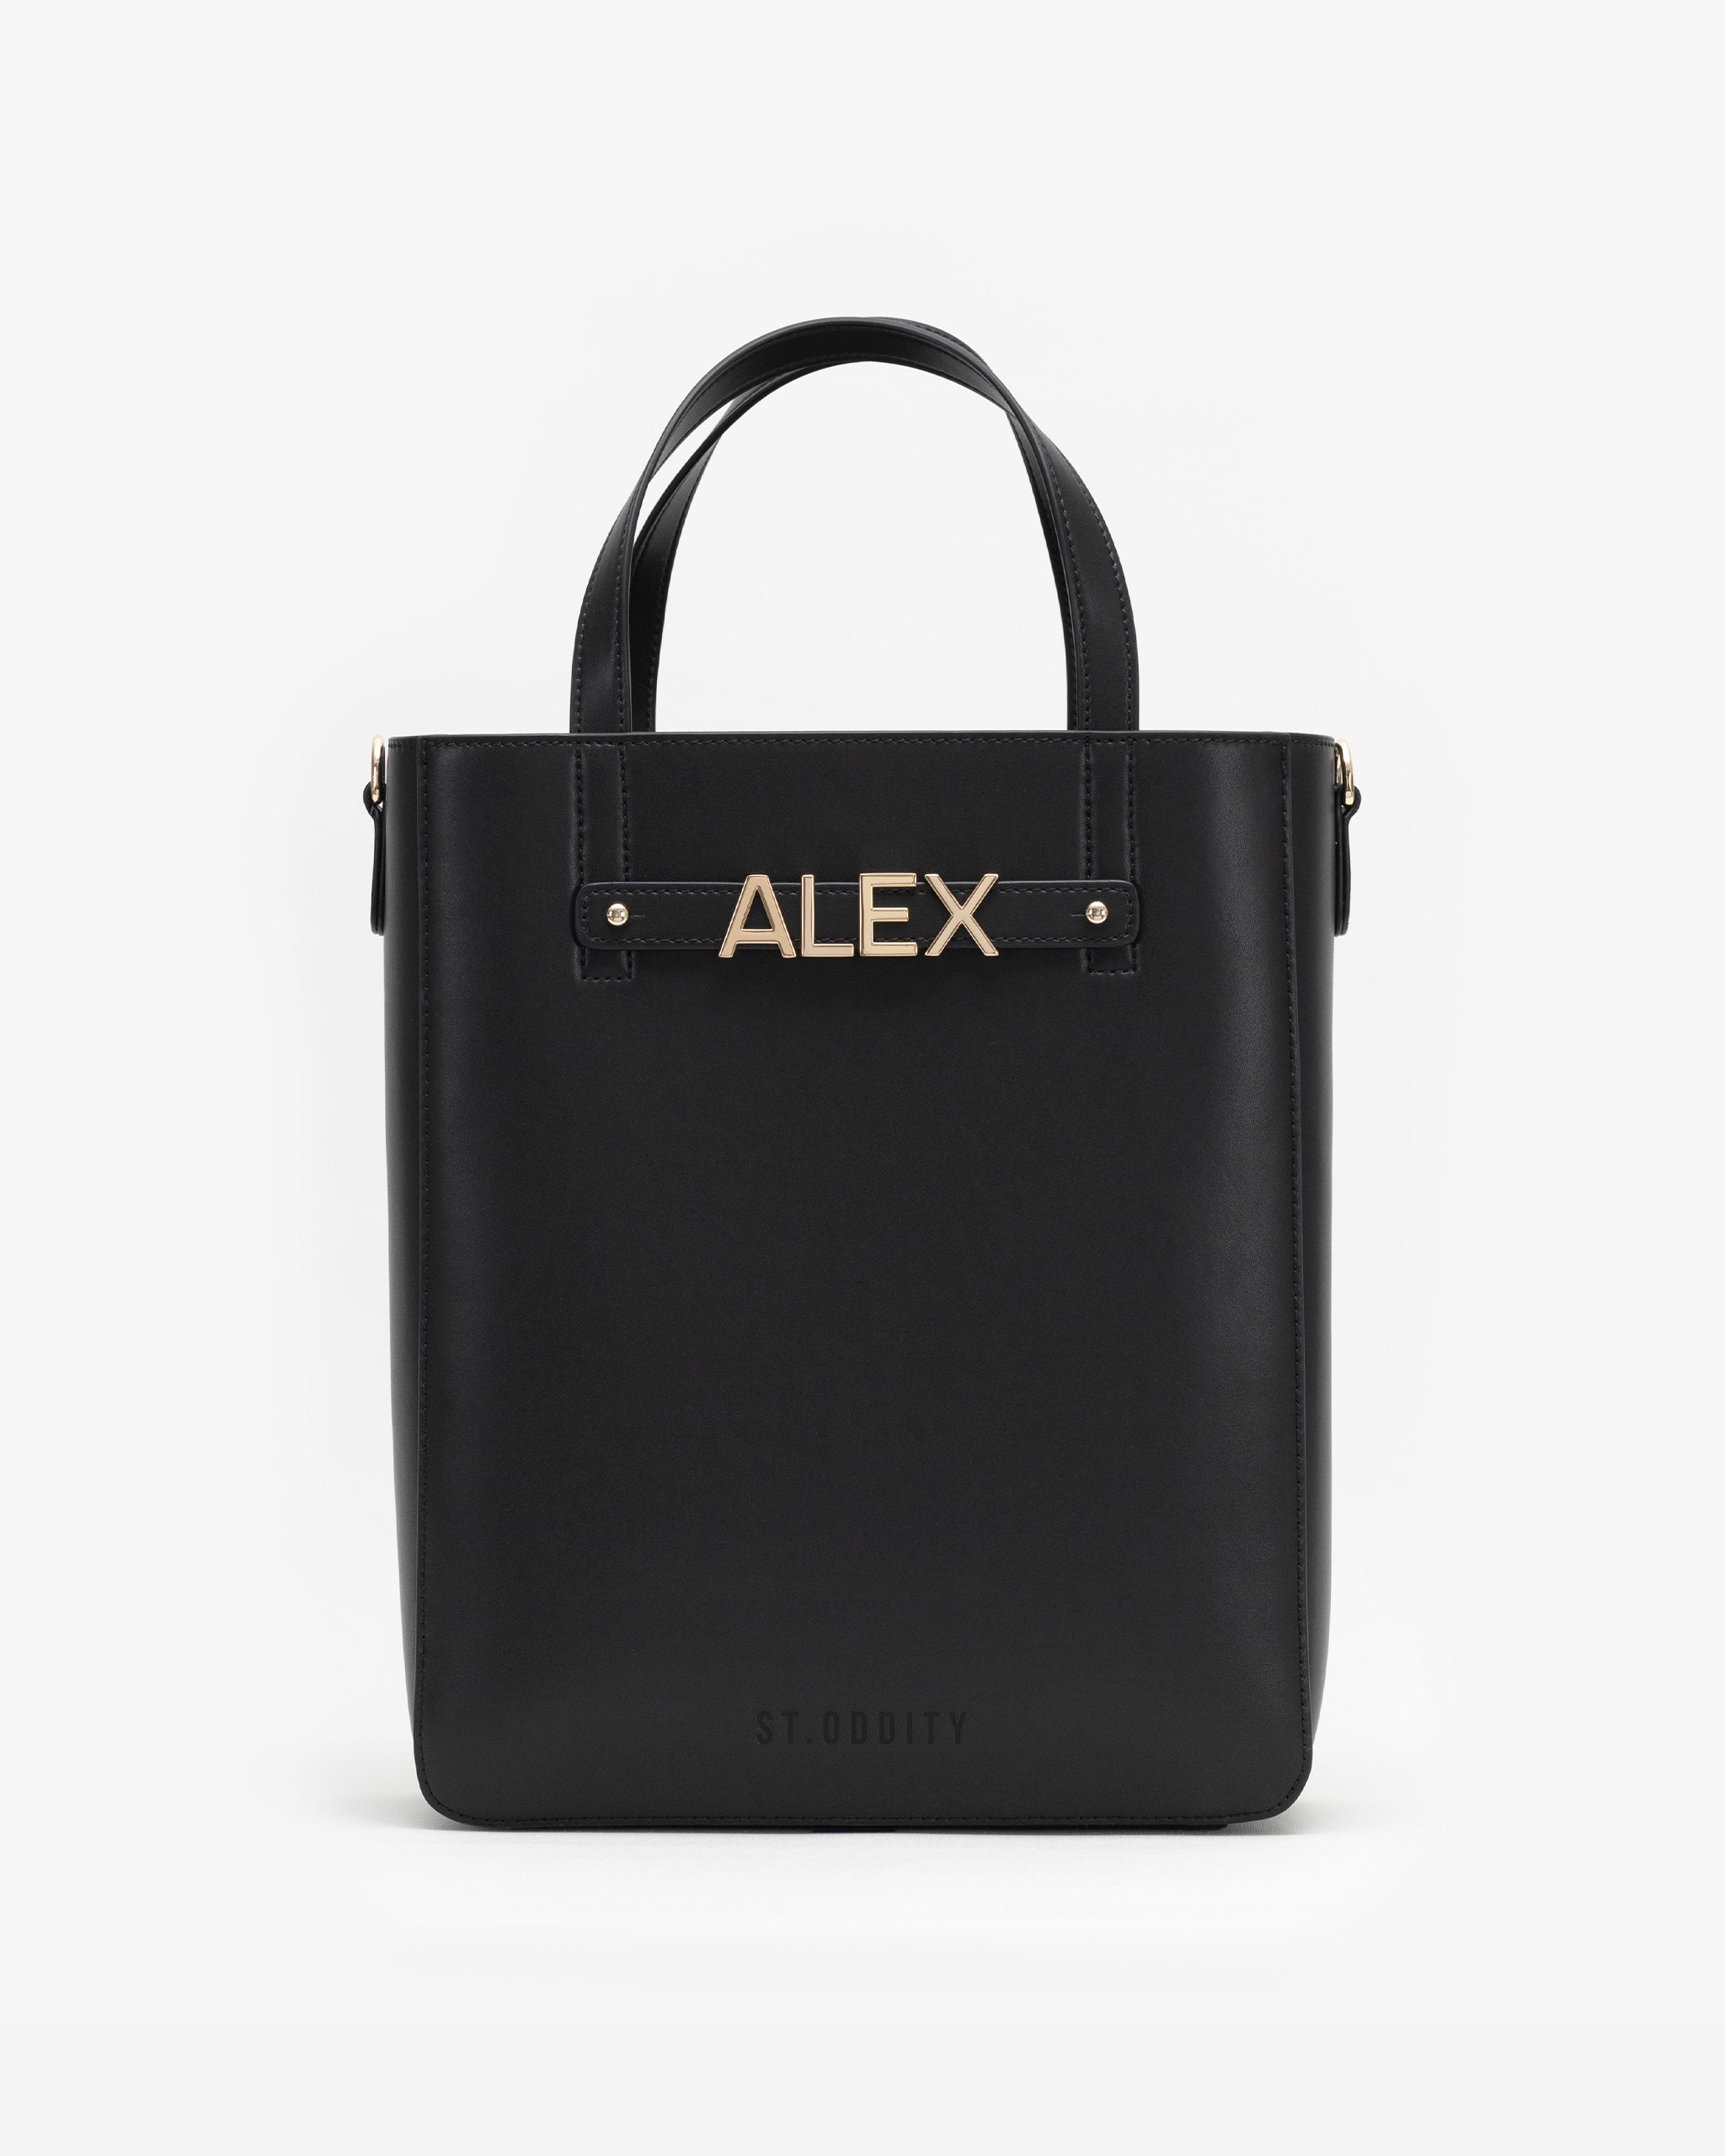 Tote in Black/Gold with Personalised Hardware